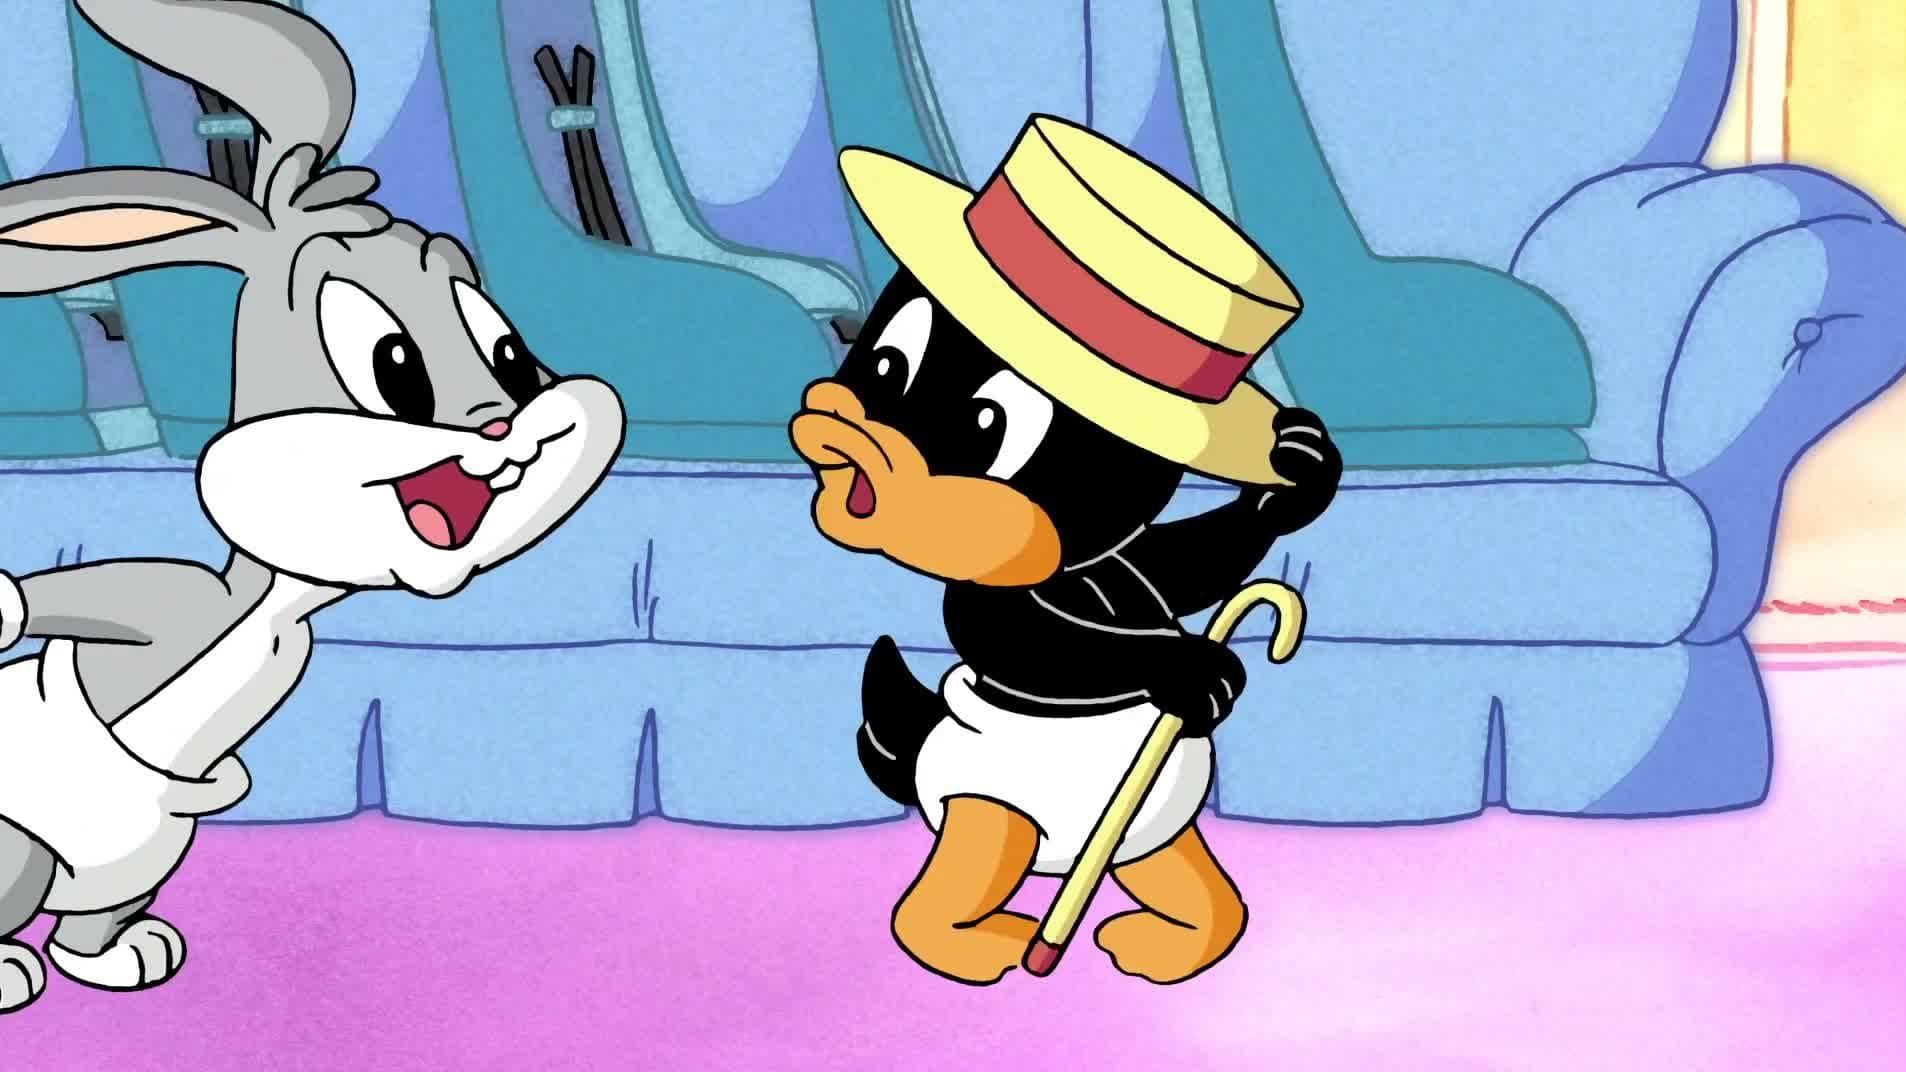 Baby Looney Tunes - streaming tv show online